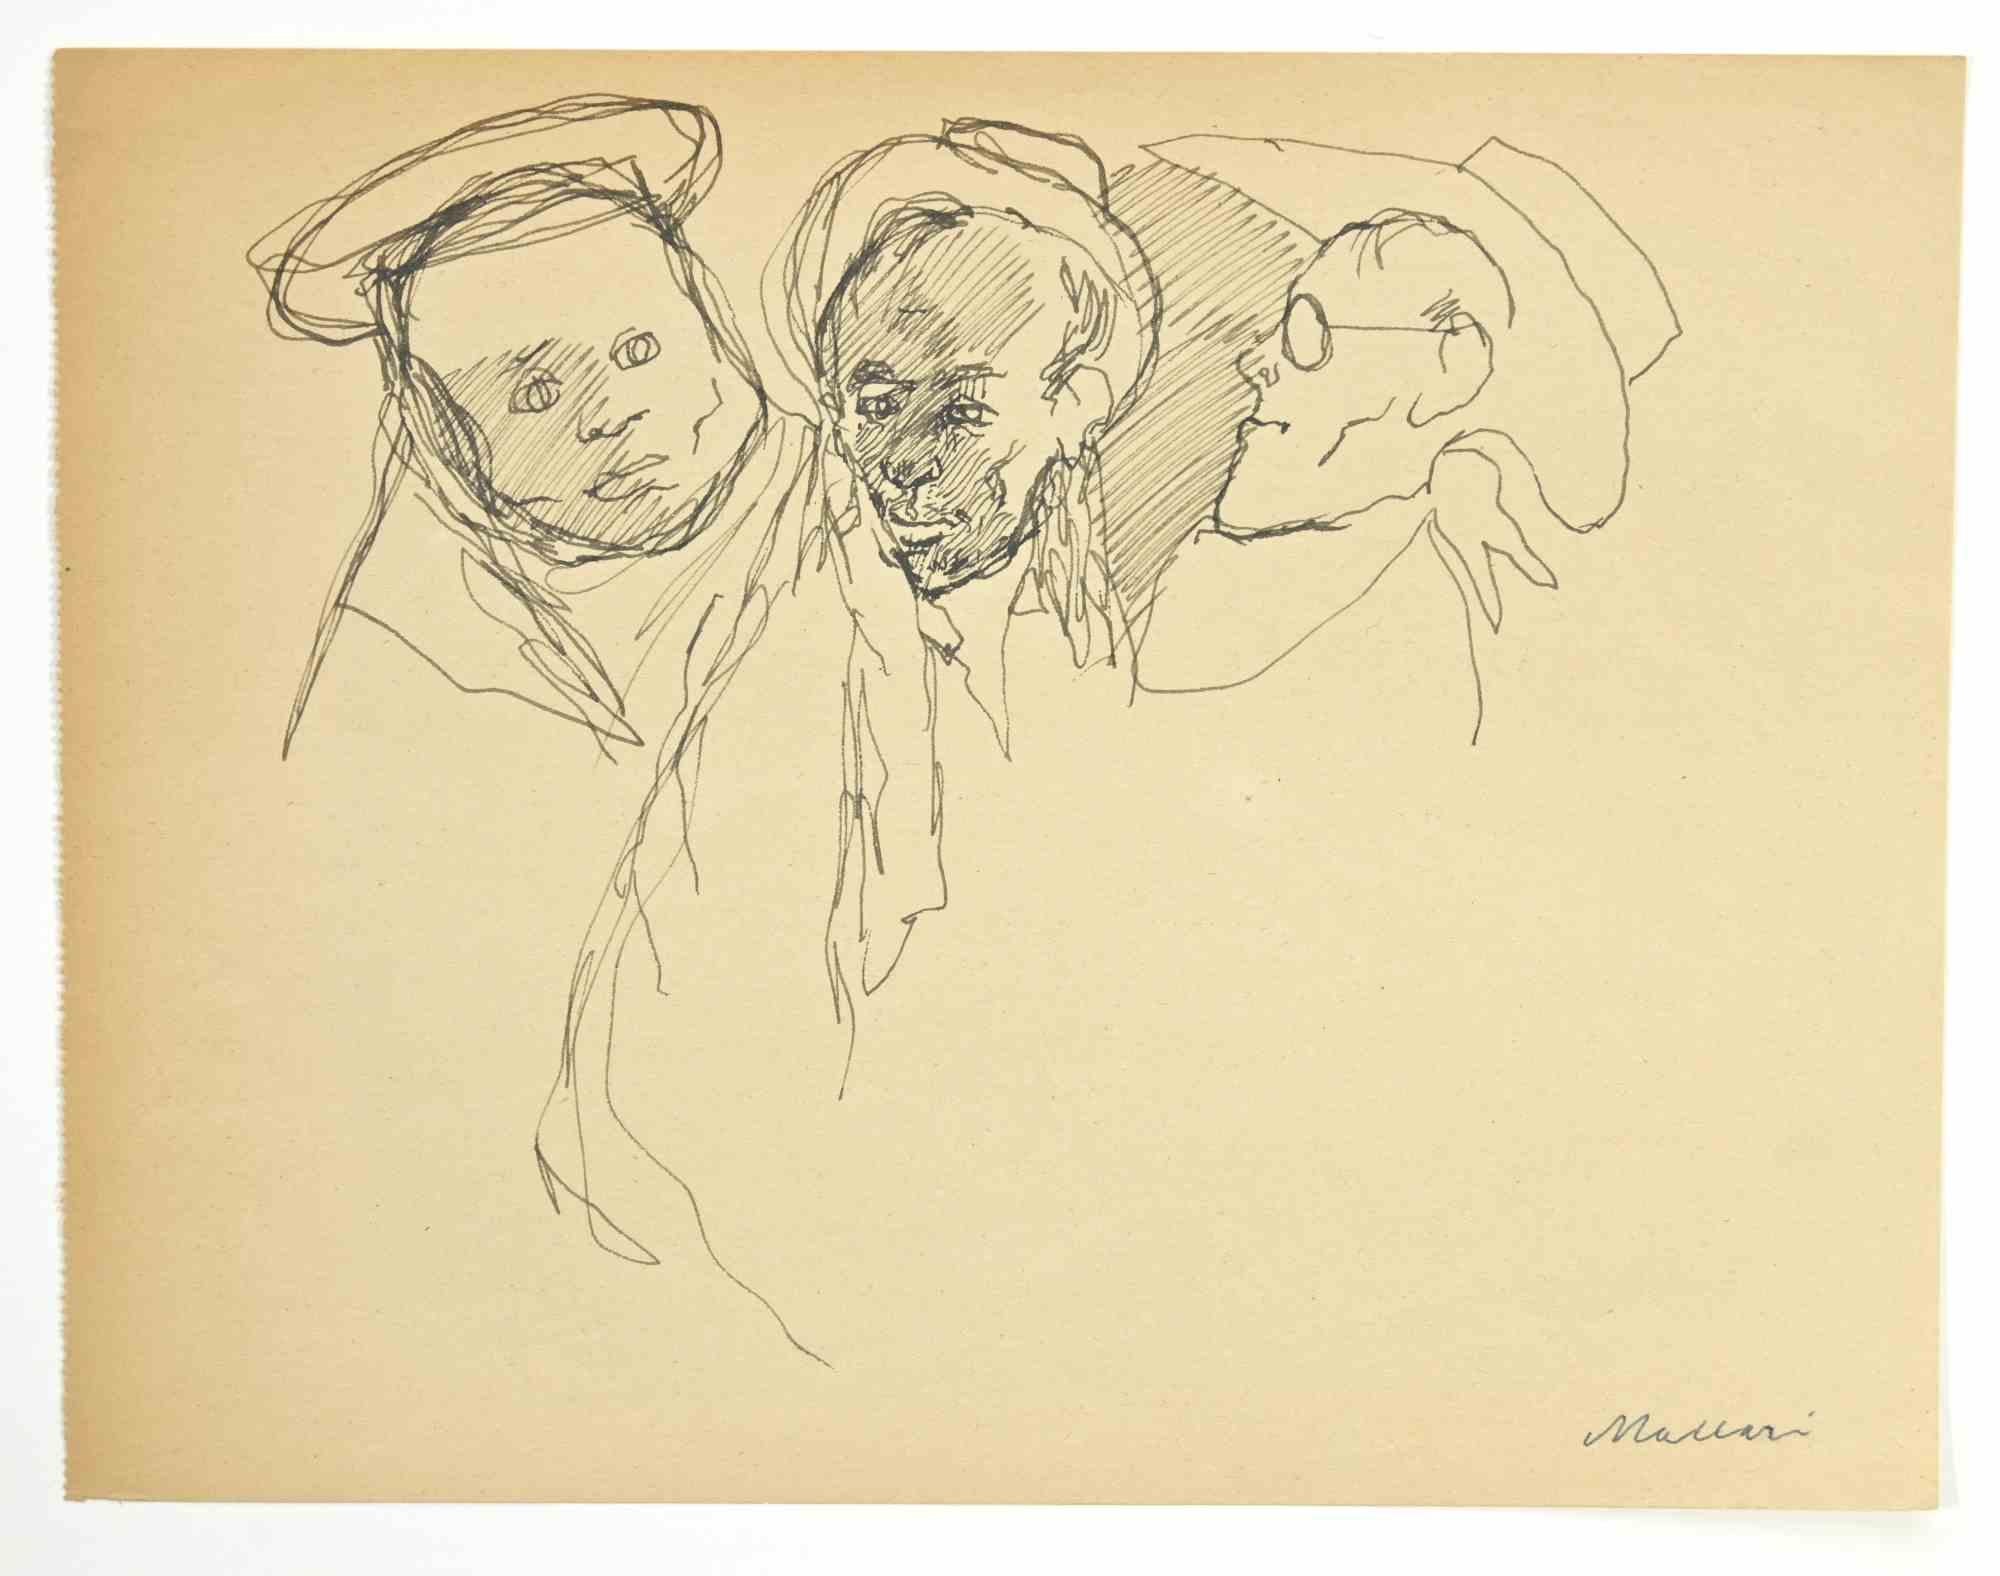 Figures is a china ink Drawing realized by Mino Maccari  (1924-1989) in the 1960s.

Hand-signed on the lower.

Good condition.

Mino Maccari (Siena, 1924-Rome, June 16, 1989) was an Italian writer, painter, engraver and journalist, winner of the